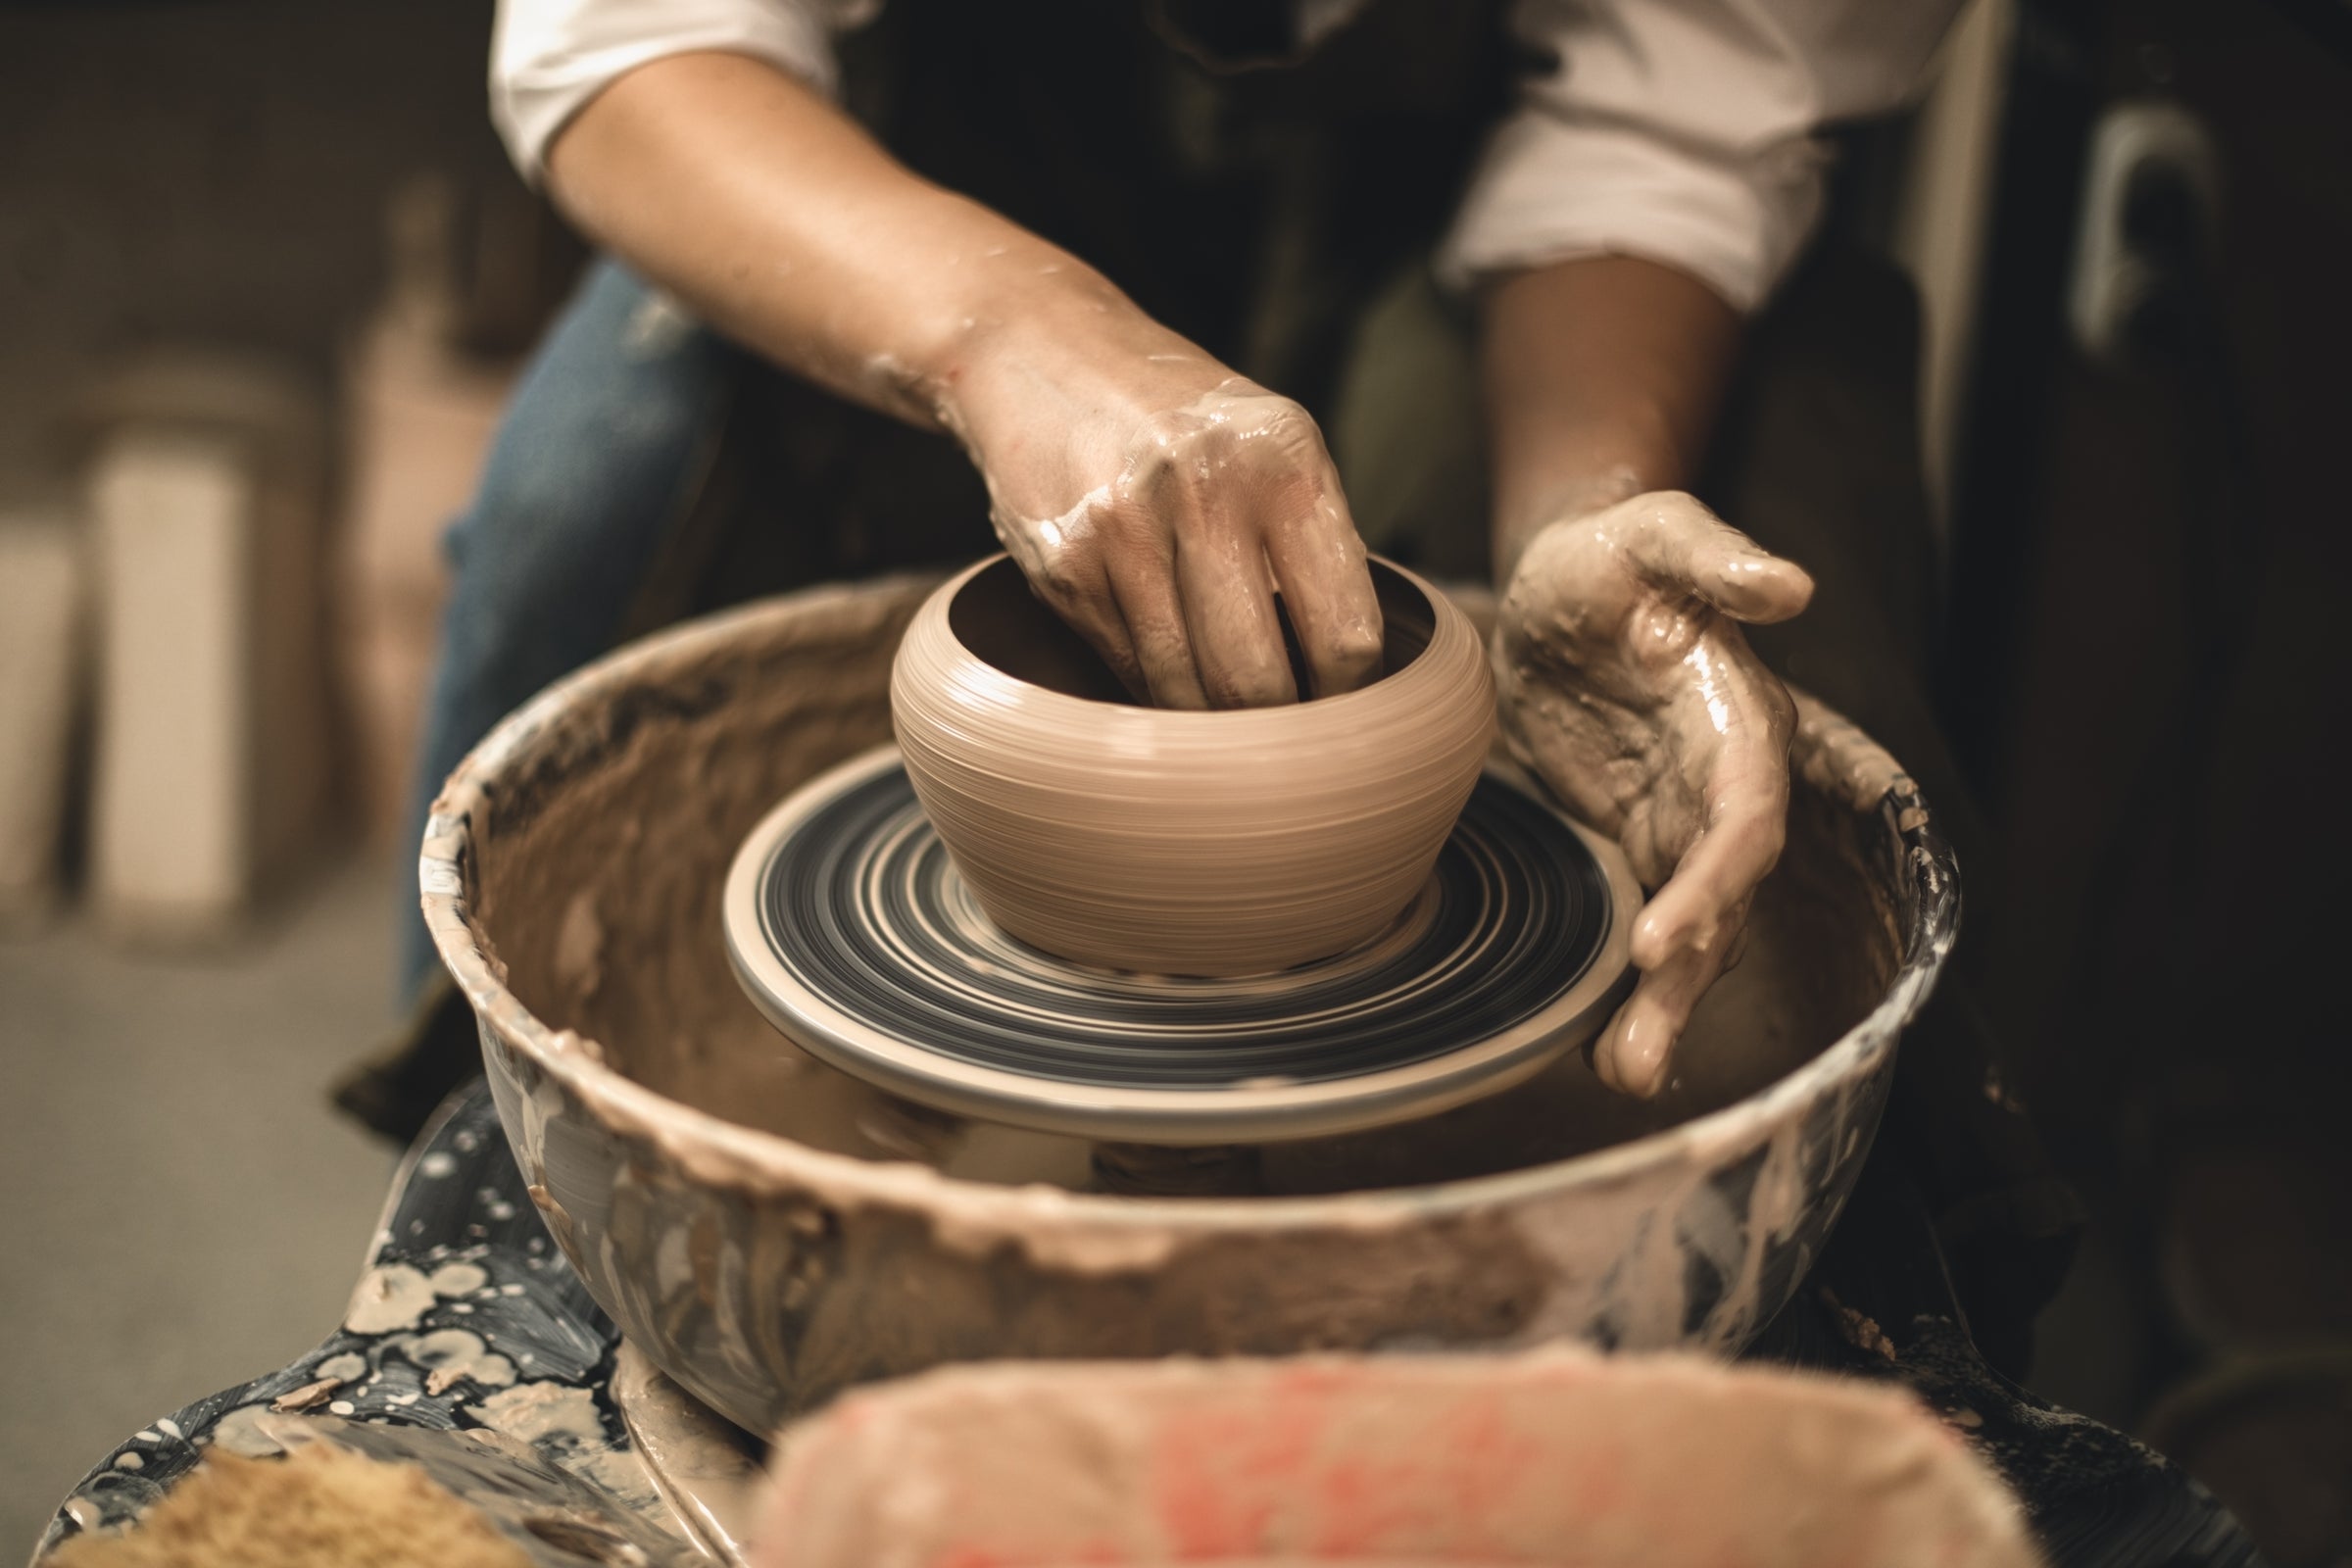 Six Clay Wheel Classes For The Price Of Five